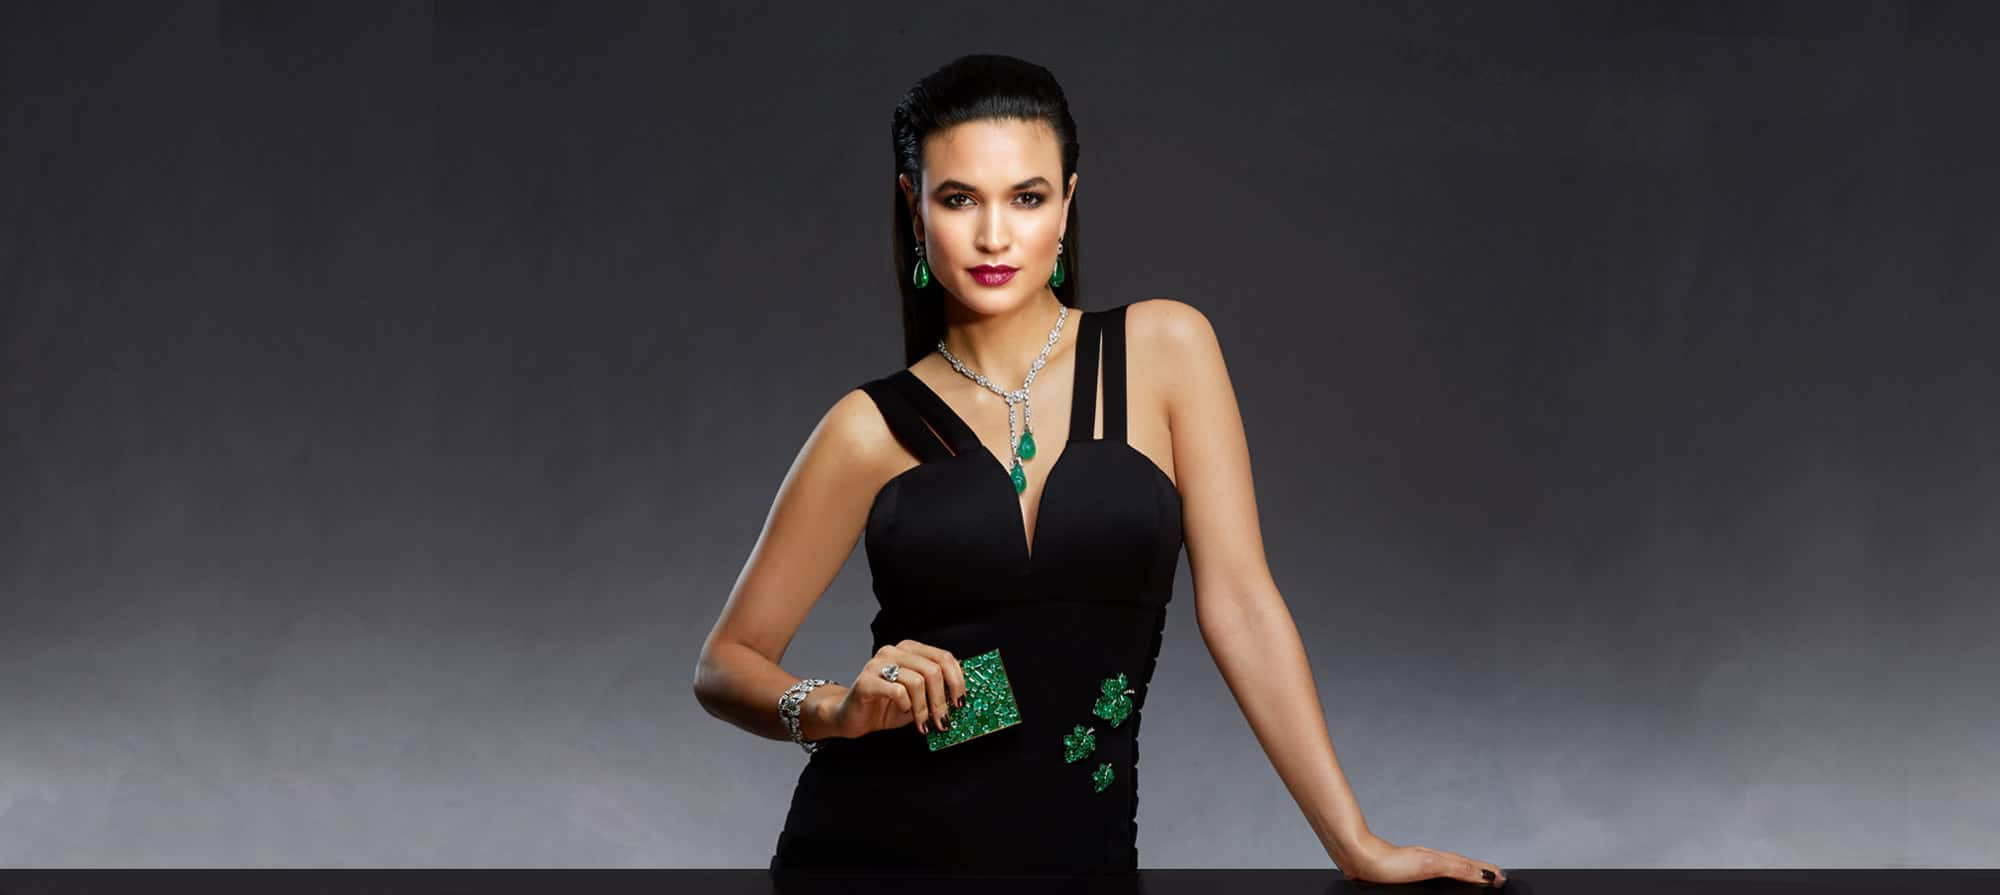 Women wearing black dress with matching teardrop emerald earrings and necklace she is holding a green piece of material, gray dark background